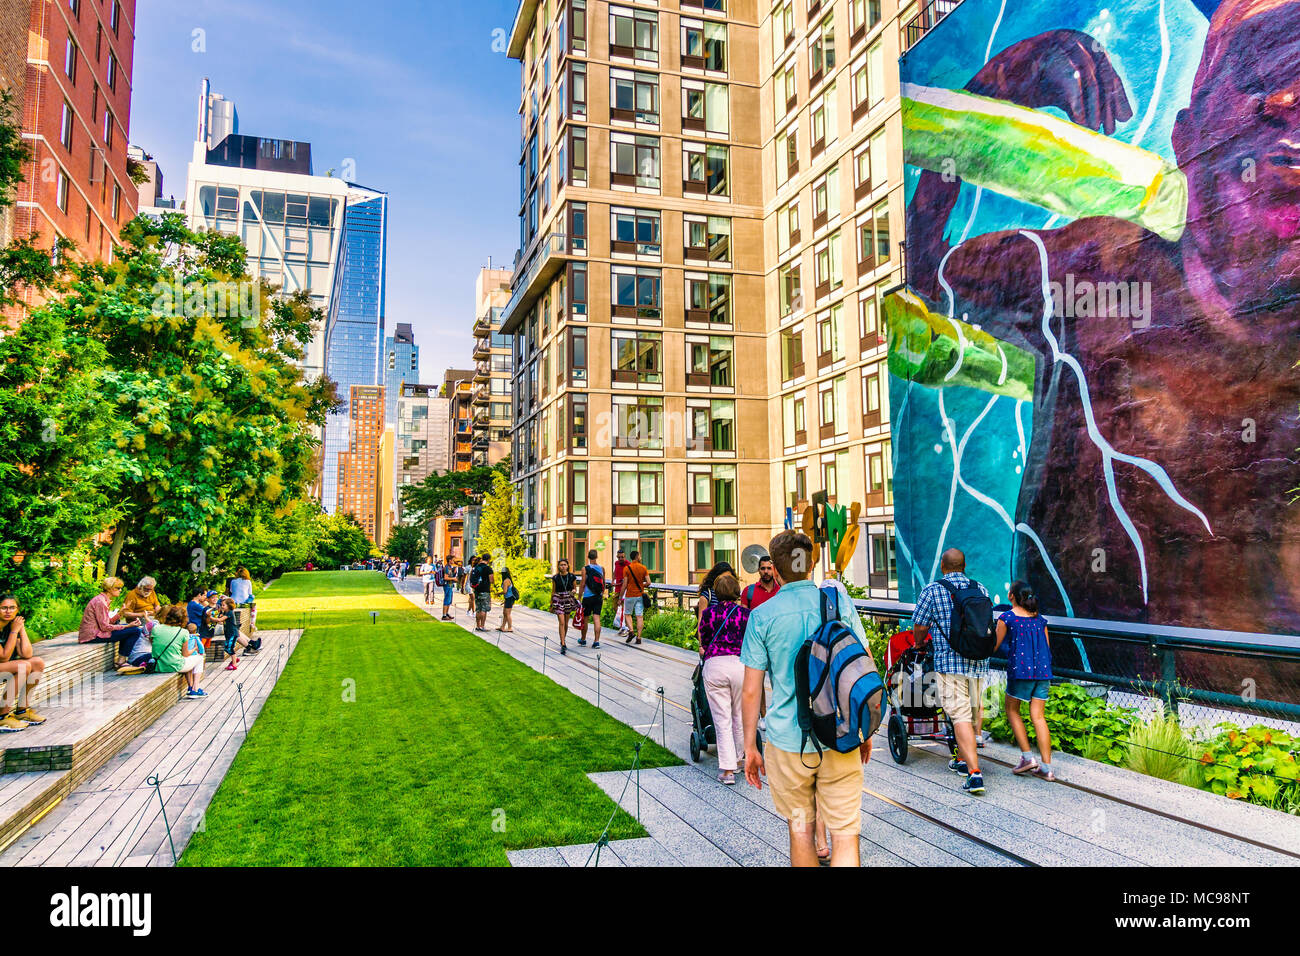 Manhattan, New York City - June 14, 2017: The High Line Park in Manhattan New York. The urban park is popular by locals and tourists built on the elev Stock Photo